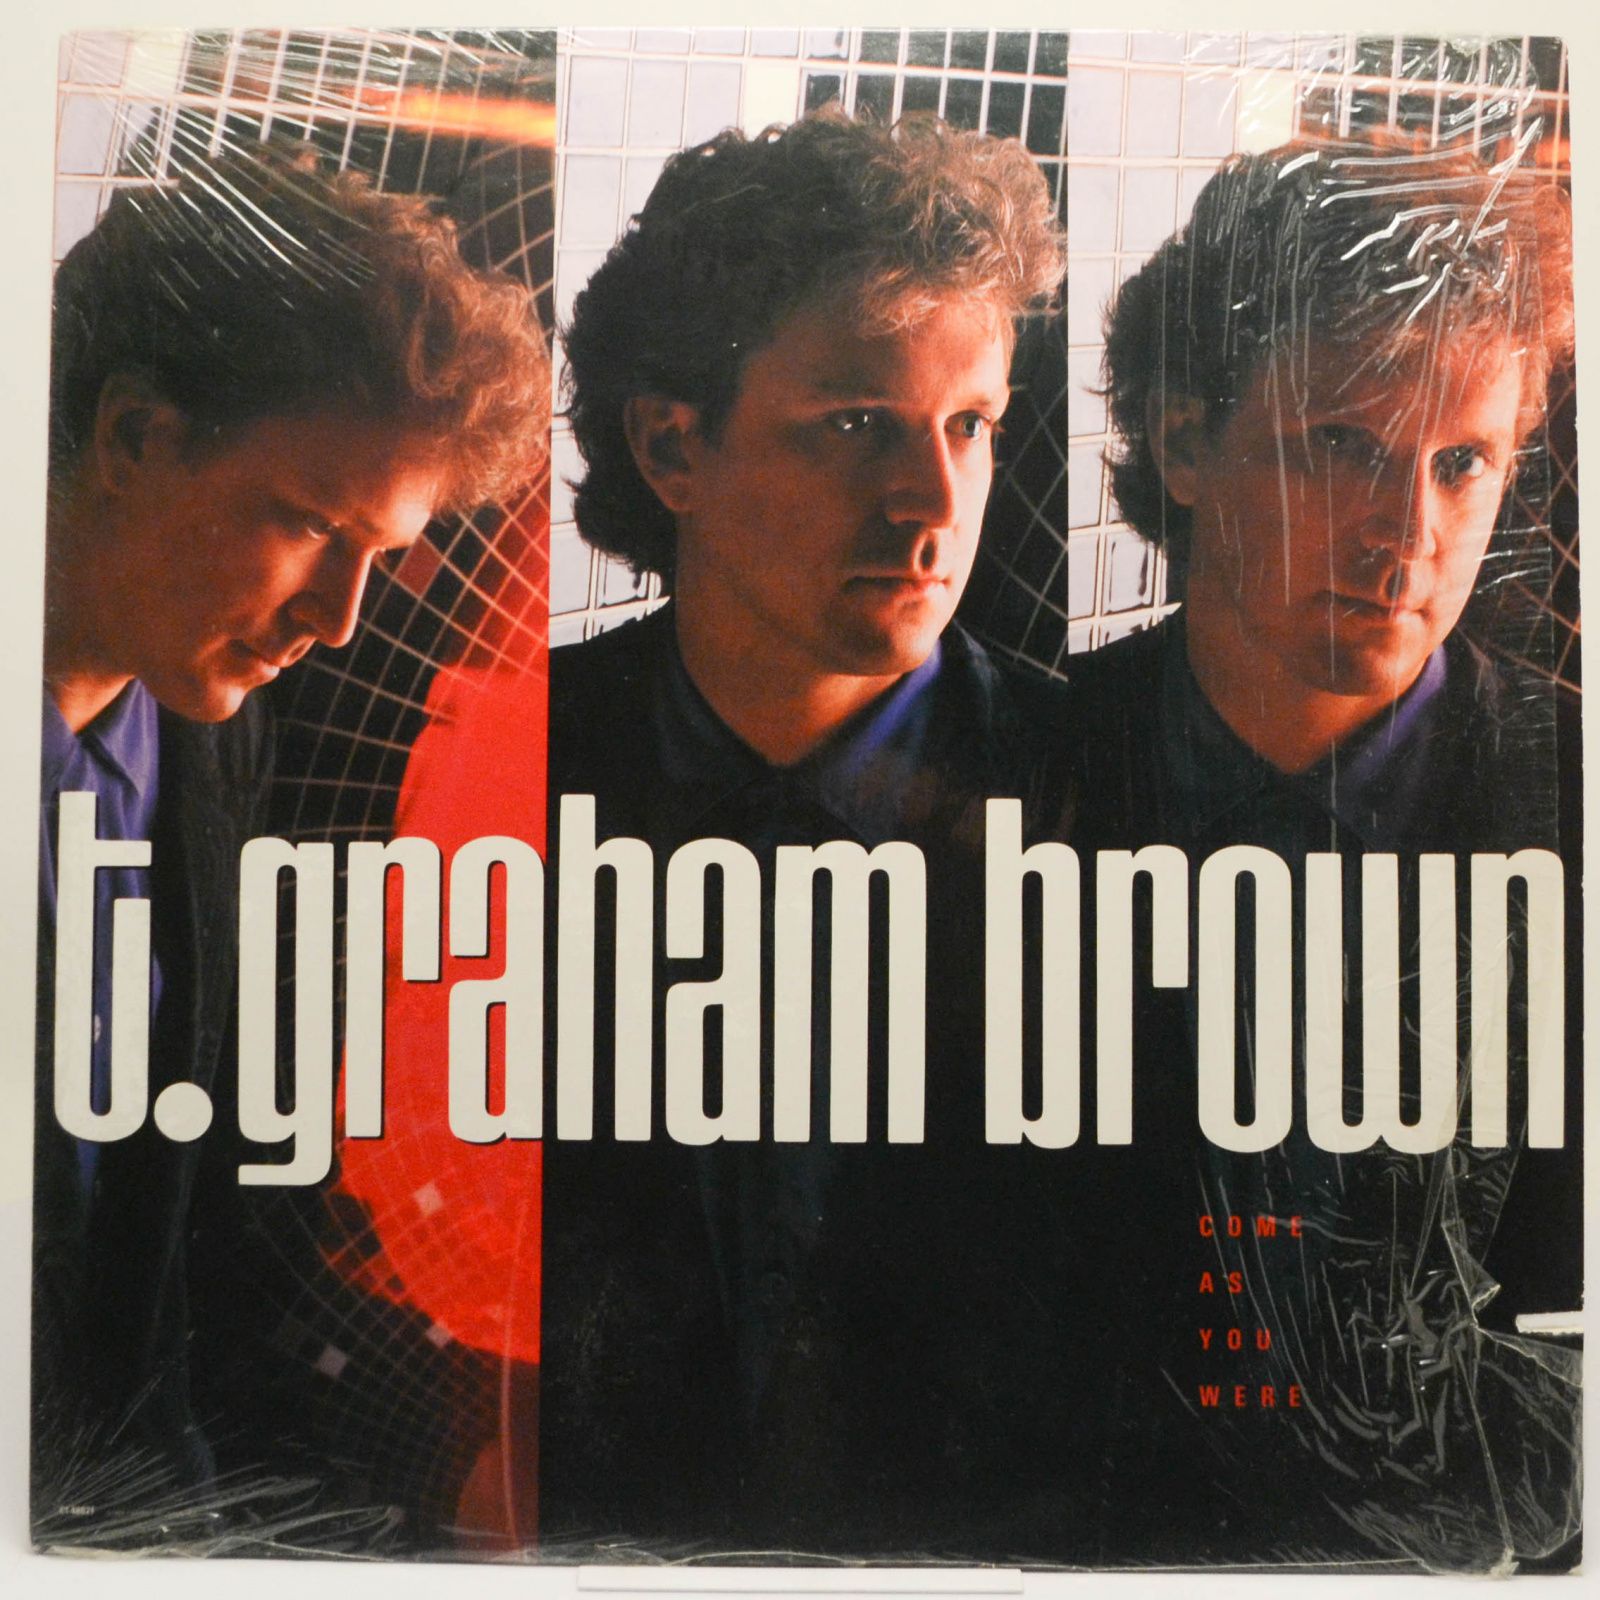 T. Graham Brown — Come As You Were, 1988